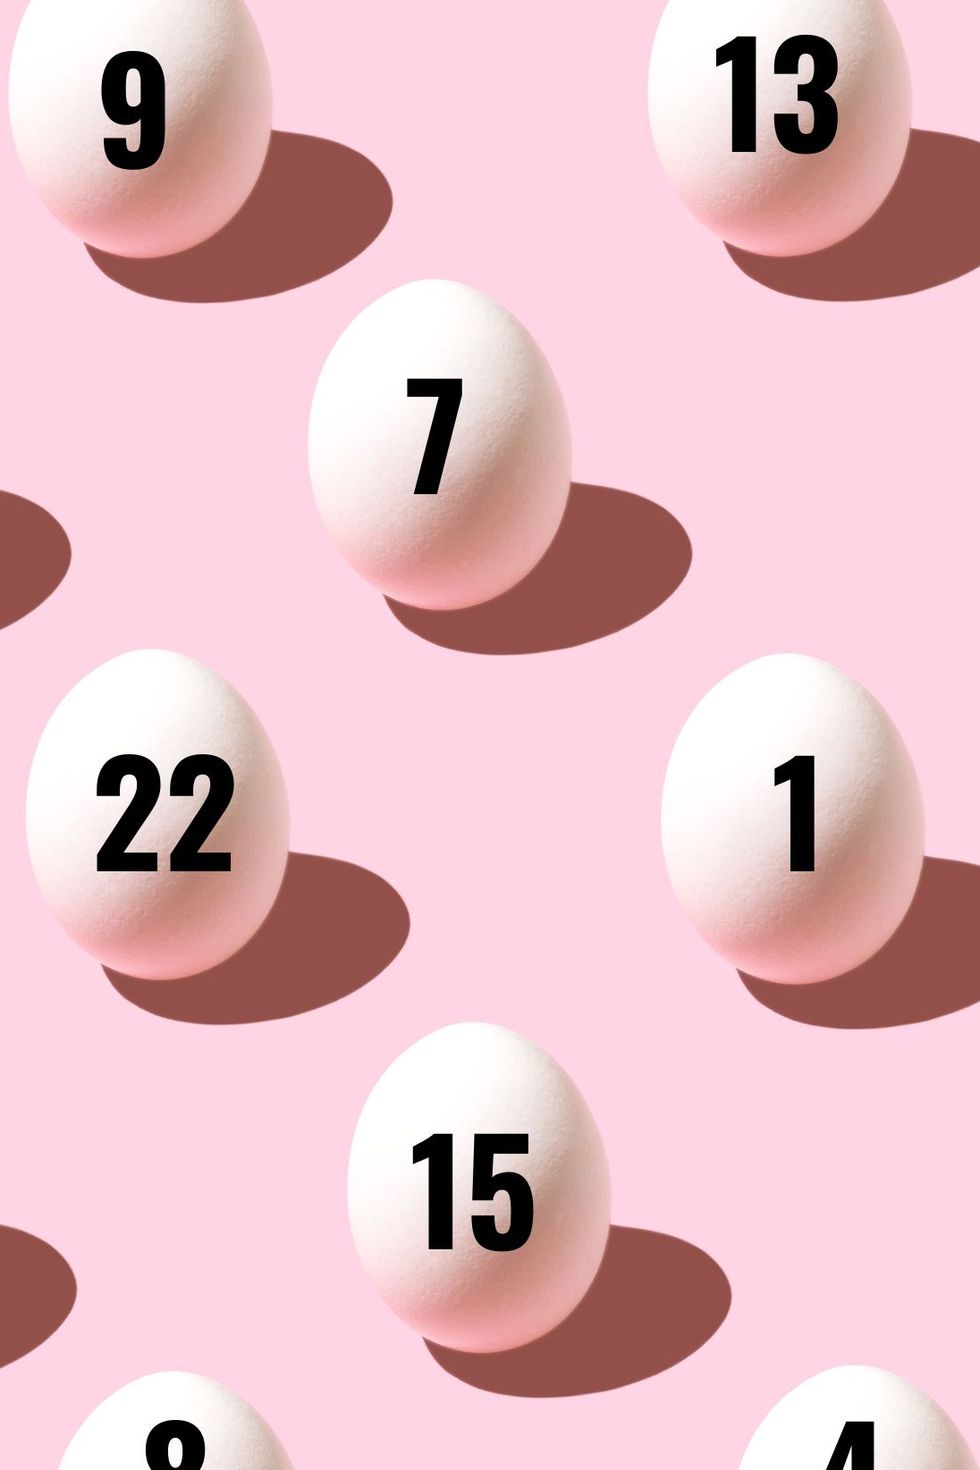 numbered eggs on a pink background for an adult easter egg hunt